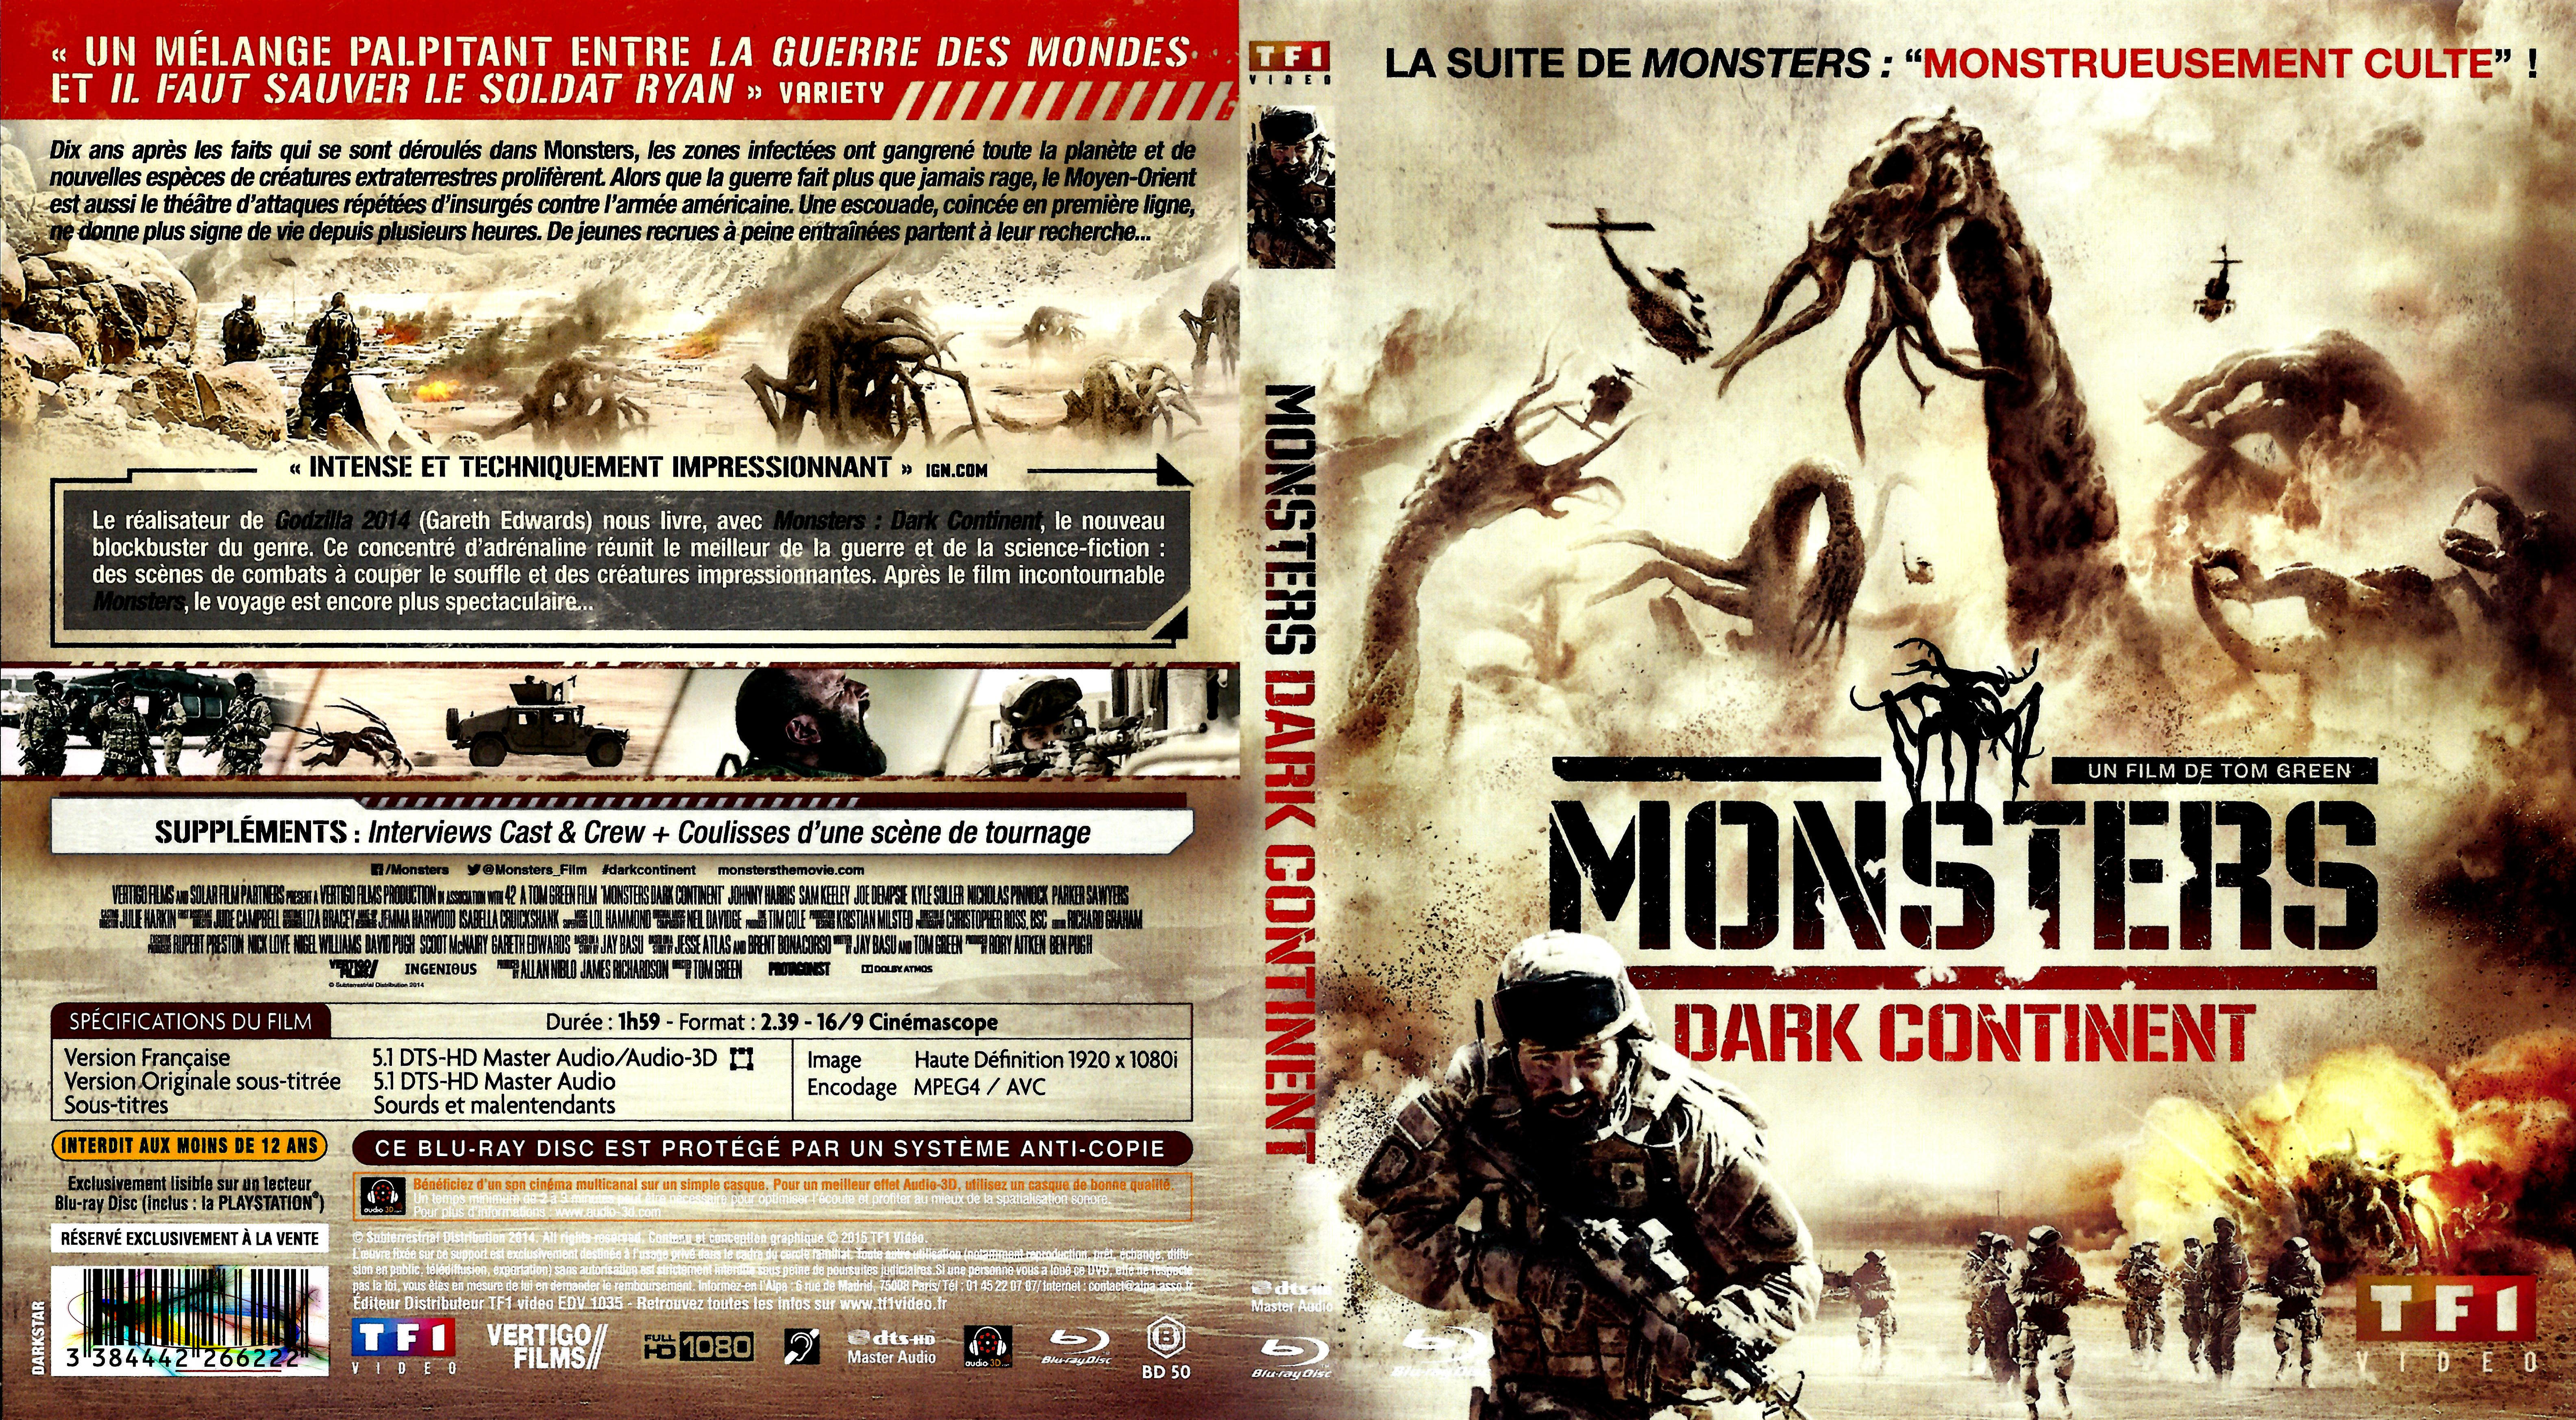 Jaquette DVD Monsters: Dark Continent (BLU-RAY)